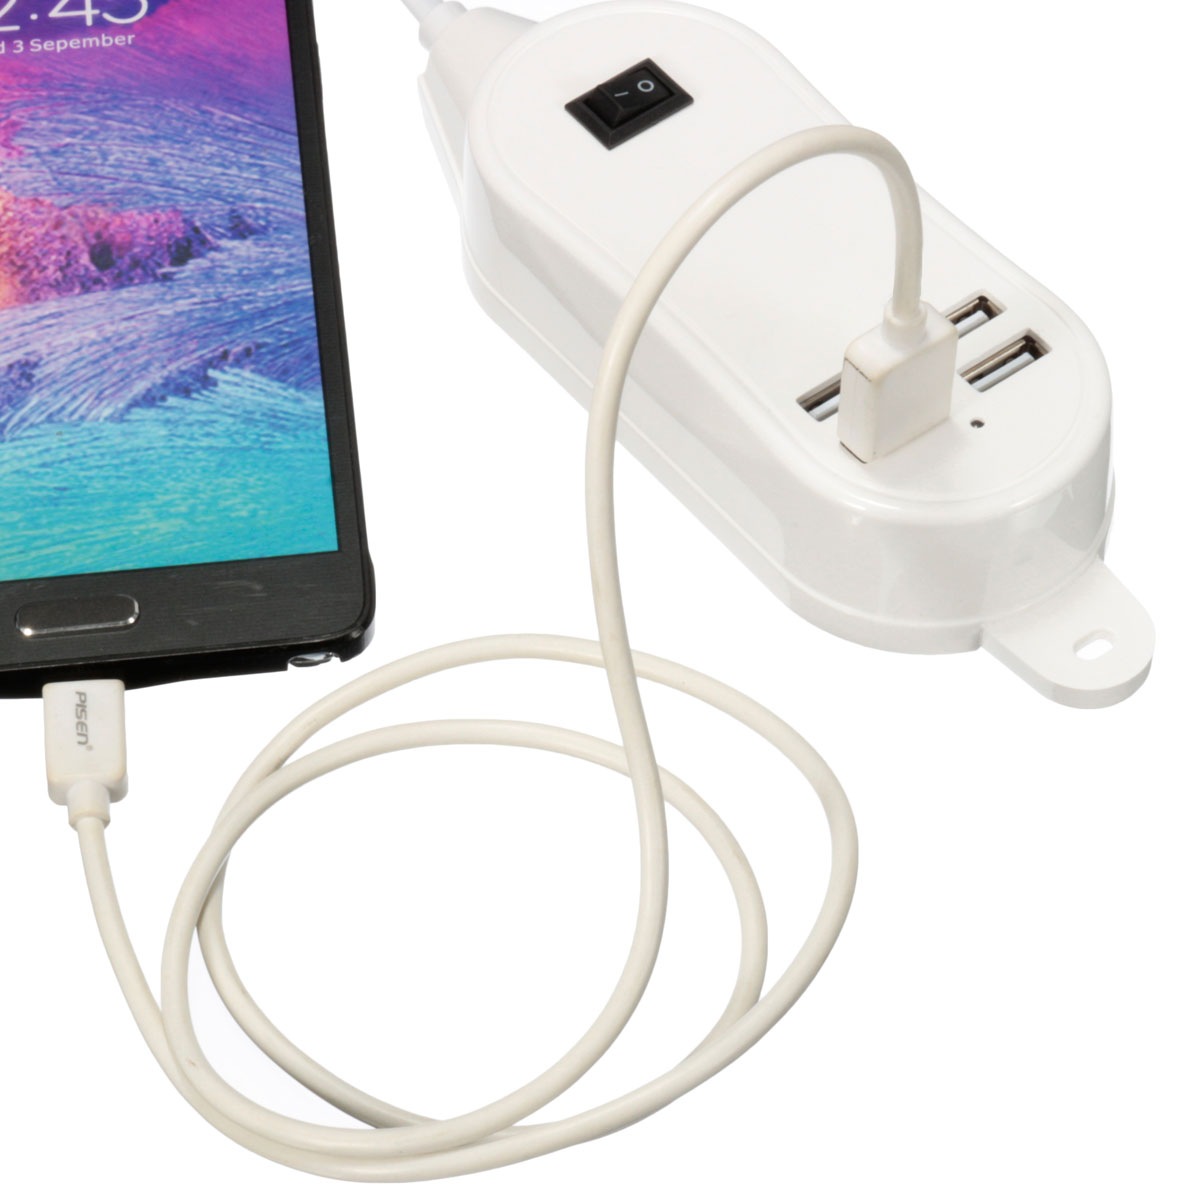 Bakeey-5A-3A-4-Port-USB-Wall-USB-Charger-Power-Adaptor-USEUUK-Plug-For-All-USB-Devices-1289438